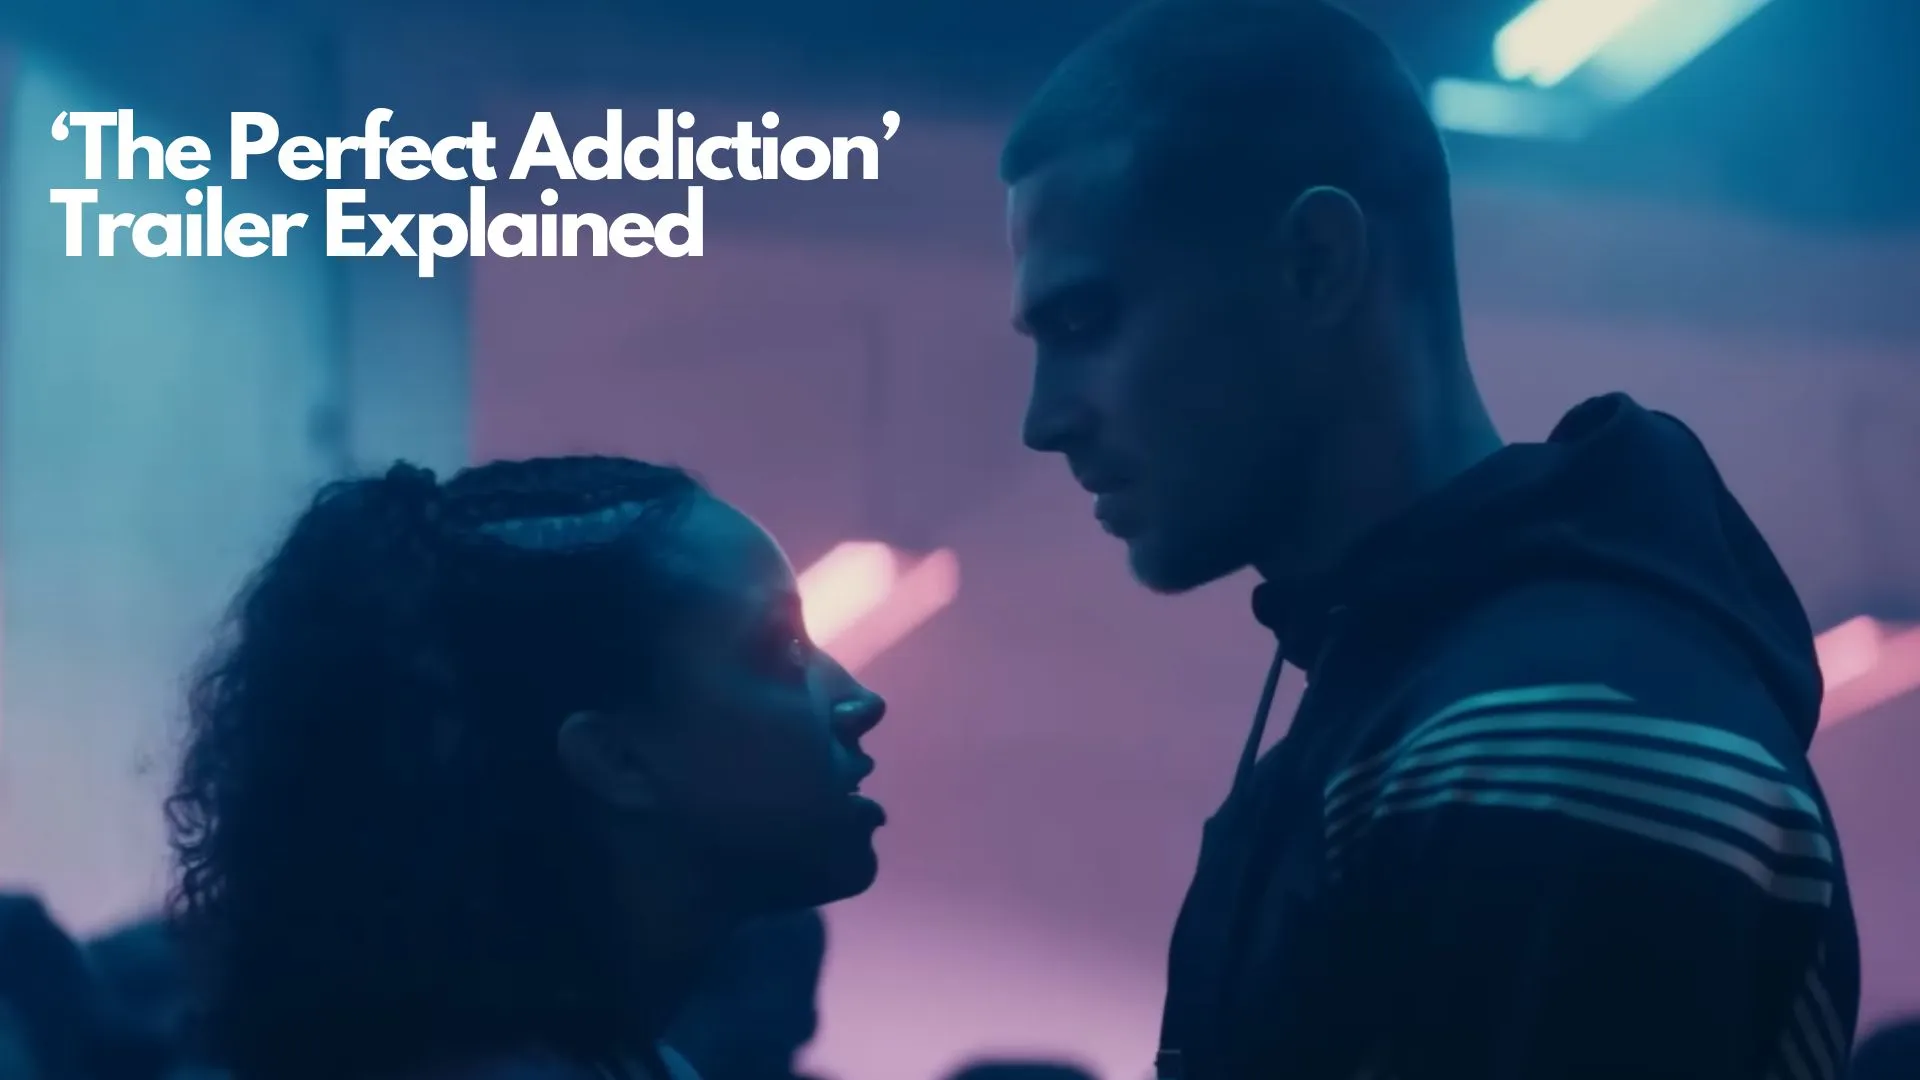 ‘The Perfect Addiction’ Trailer Explained (Image credit: Youtube)